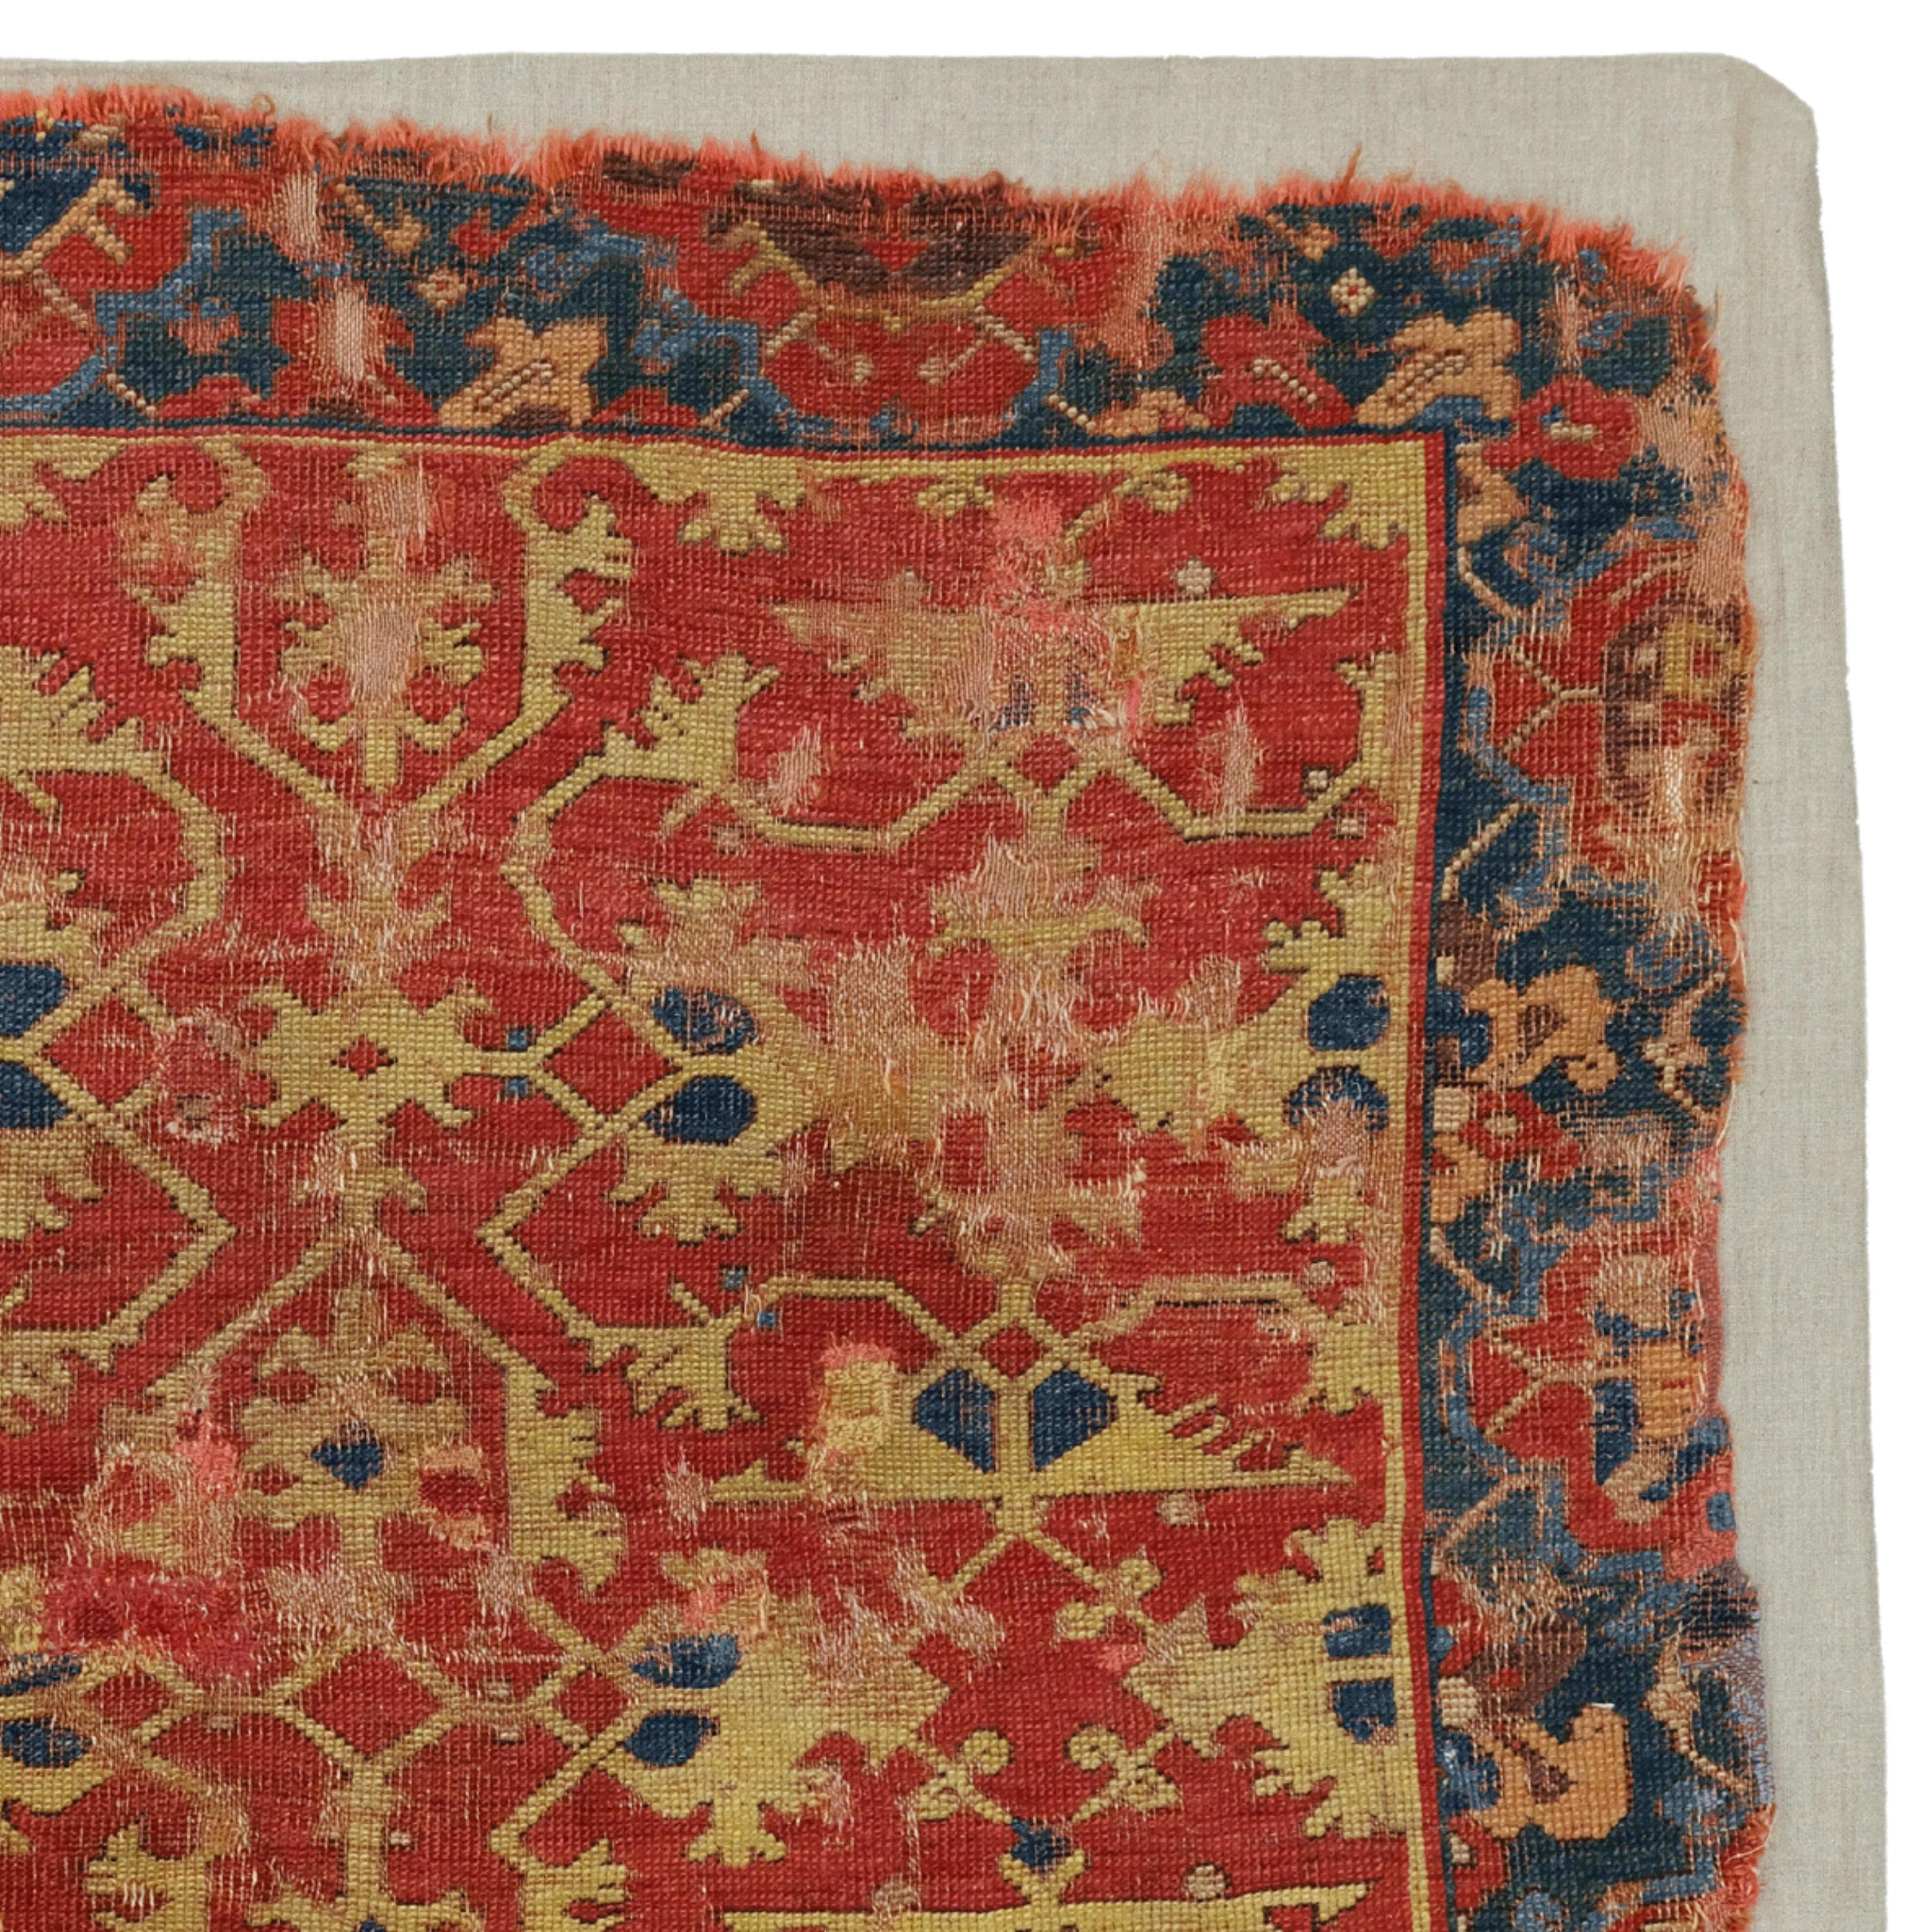 Turkish Early 17th Century Lotto Rug Fragment - Antique Fragment, Antique Rug For Sale